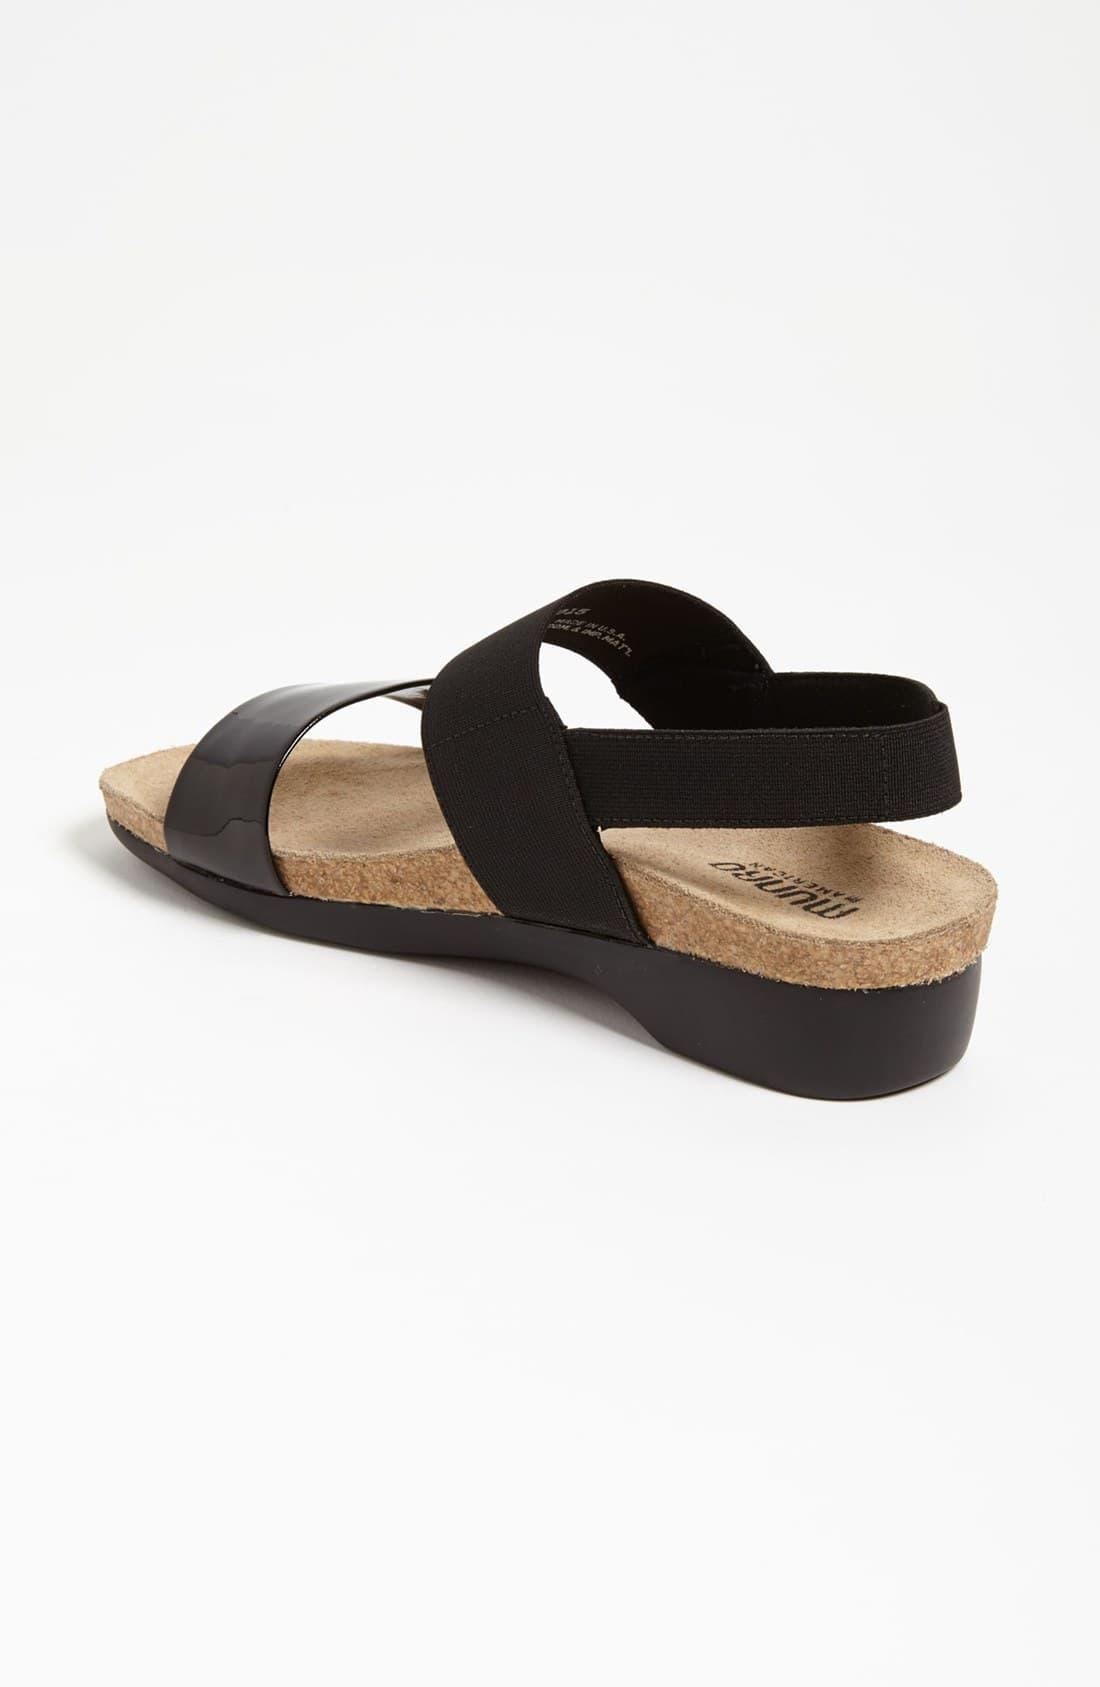 munro pisces sandals on sale